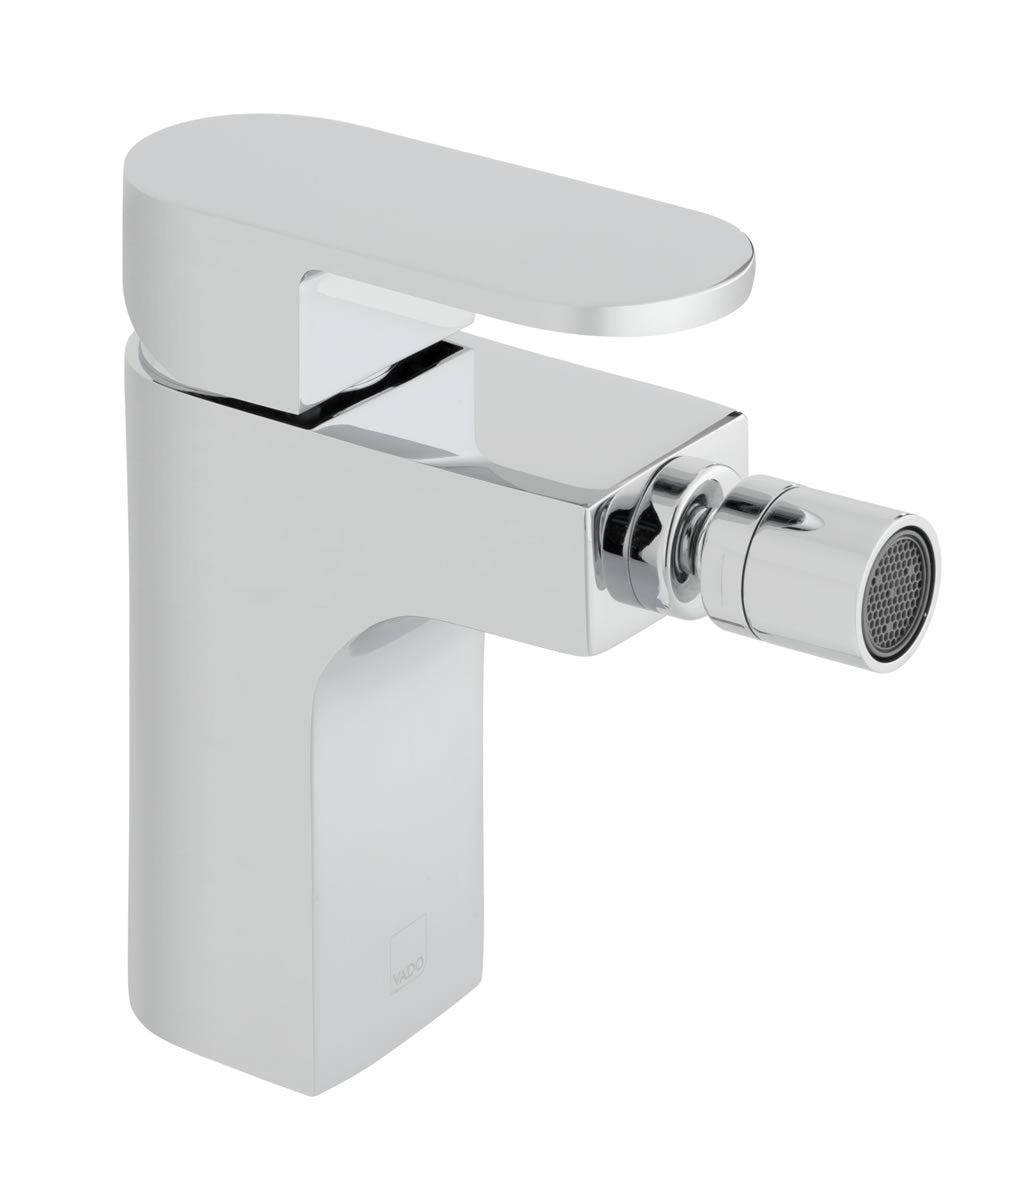 Vado Life Mono Bidet Mixer Smooth Bodied Single Lever Deck Mounted without Pop-Up Waste